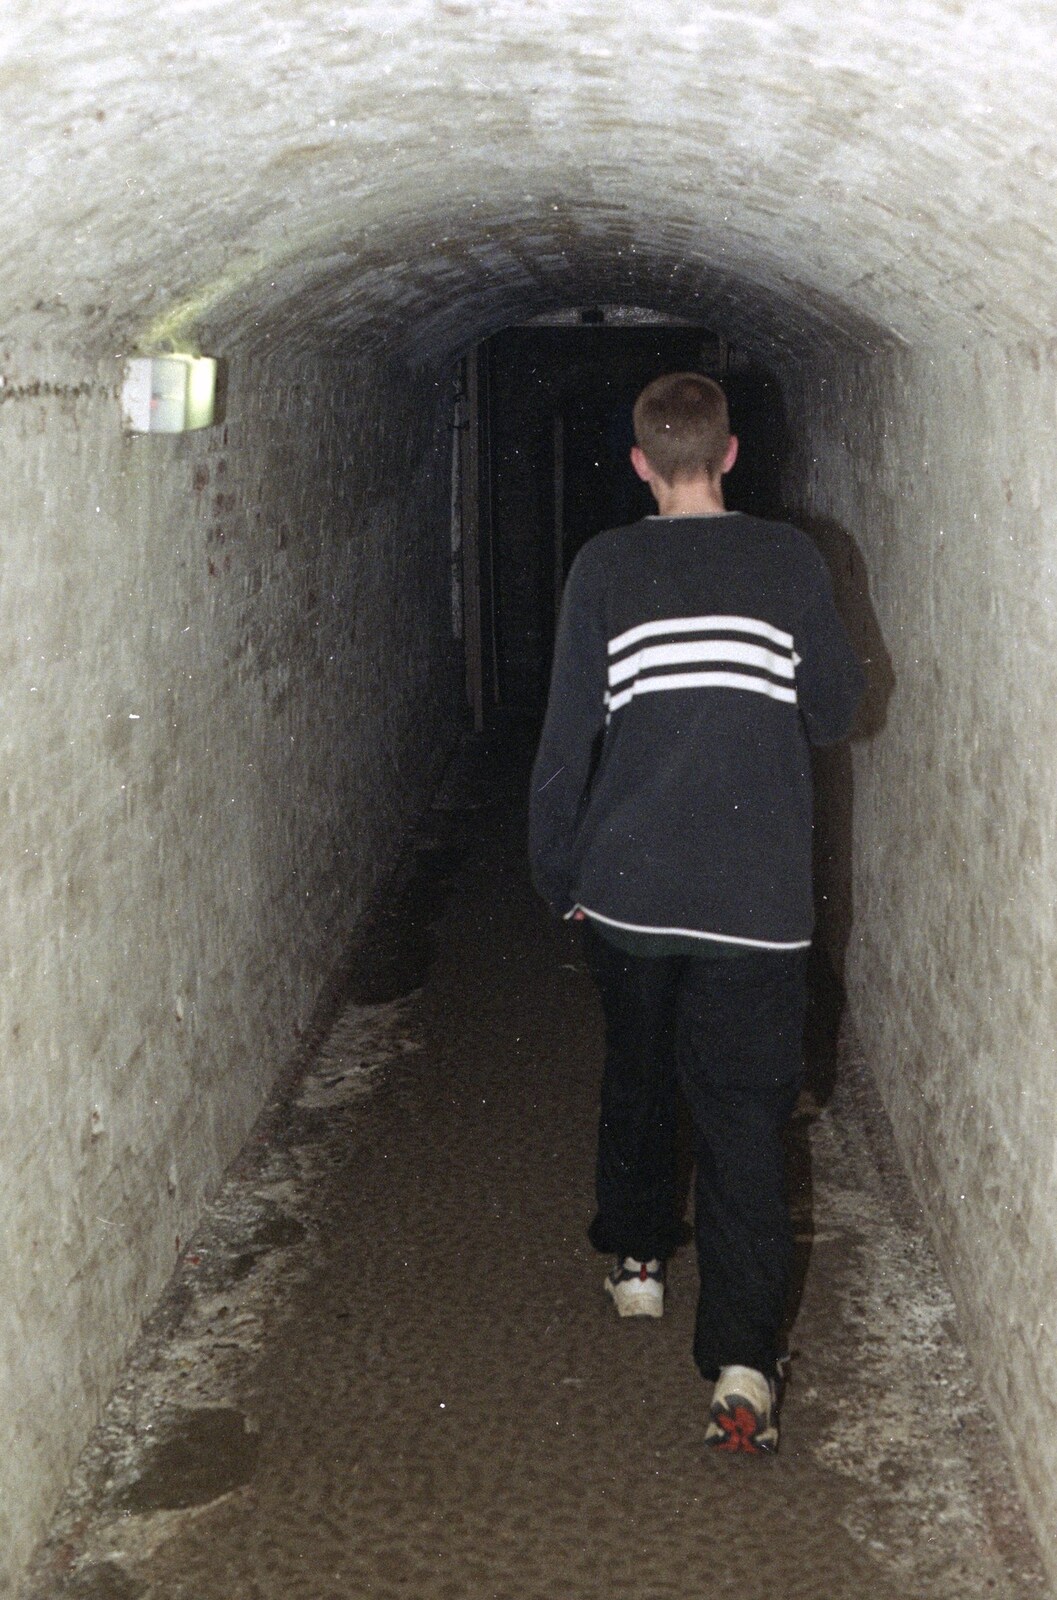 The Boy Phil in the war room tunnels from A BSCC Bike Ride to Gravelines, Pas de Calais, France - 11th May 2000